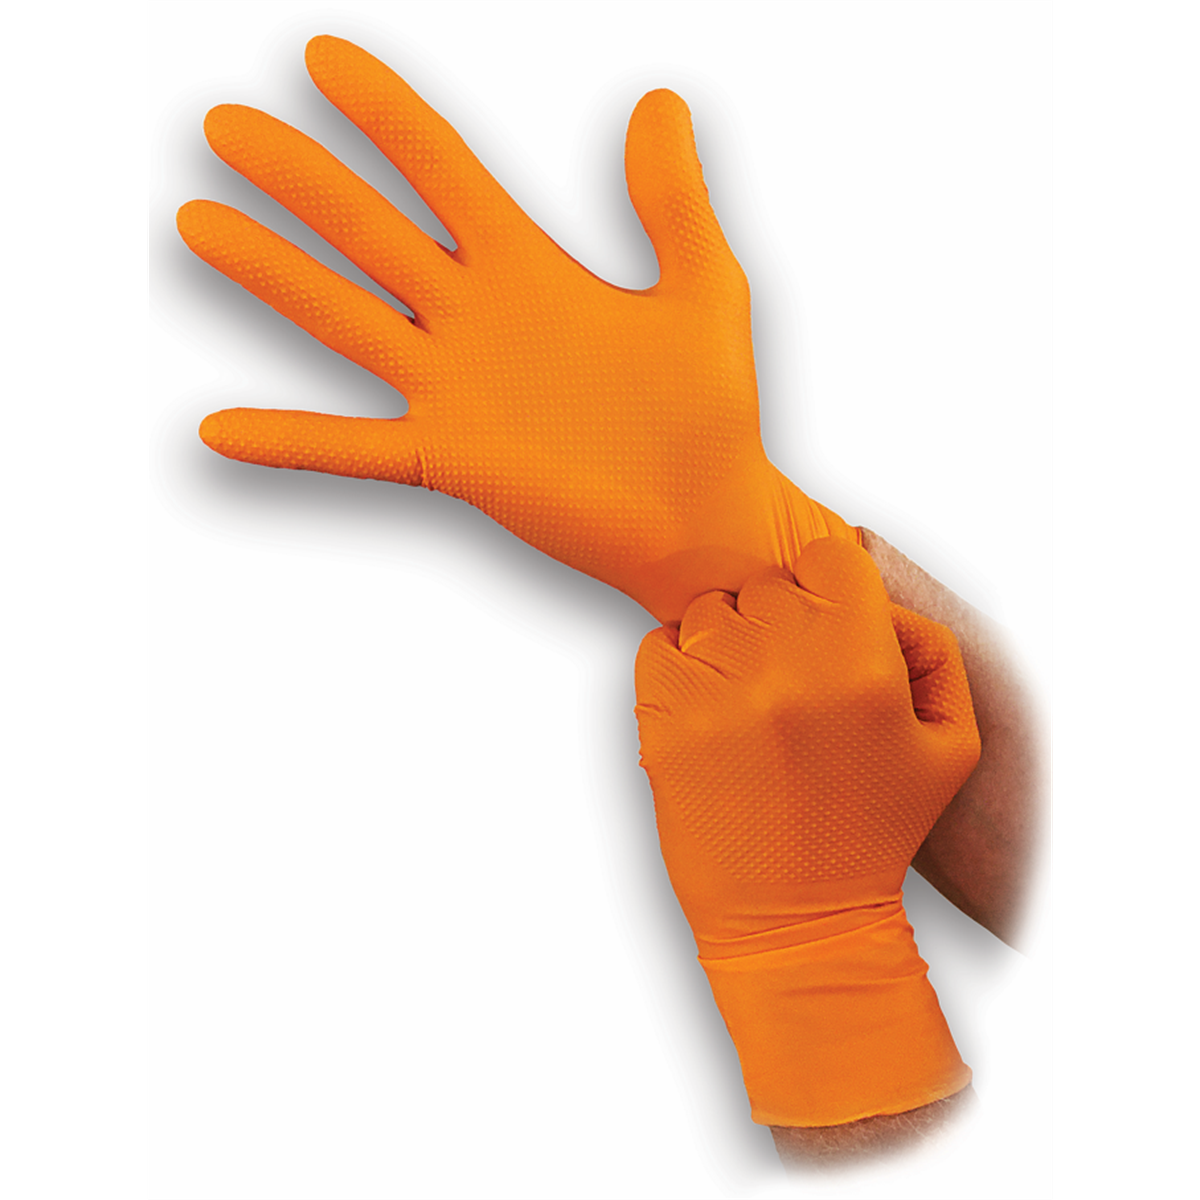 Picture of Atlantic Safety Products BLGOO-XL Super Tough 8 Mil Powder Free Nitrile Disposable Gloves with Aggressive Diamond Grip, Orange - Extra Large - 100 per Box